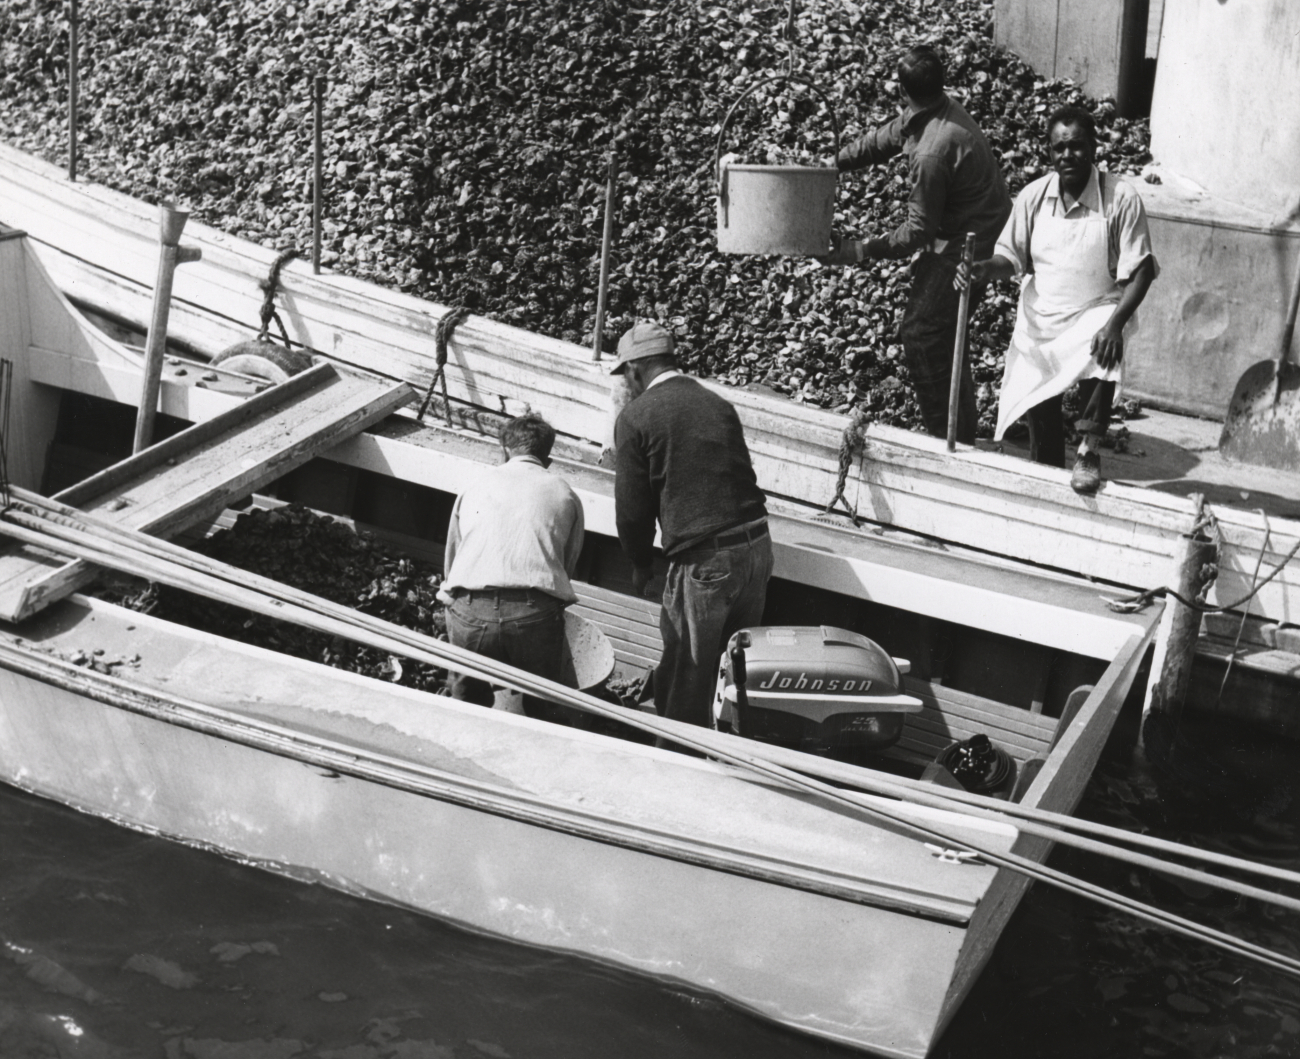 Oyster tonger unloading his catch on buy boat